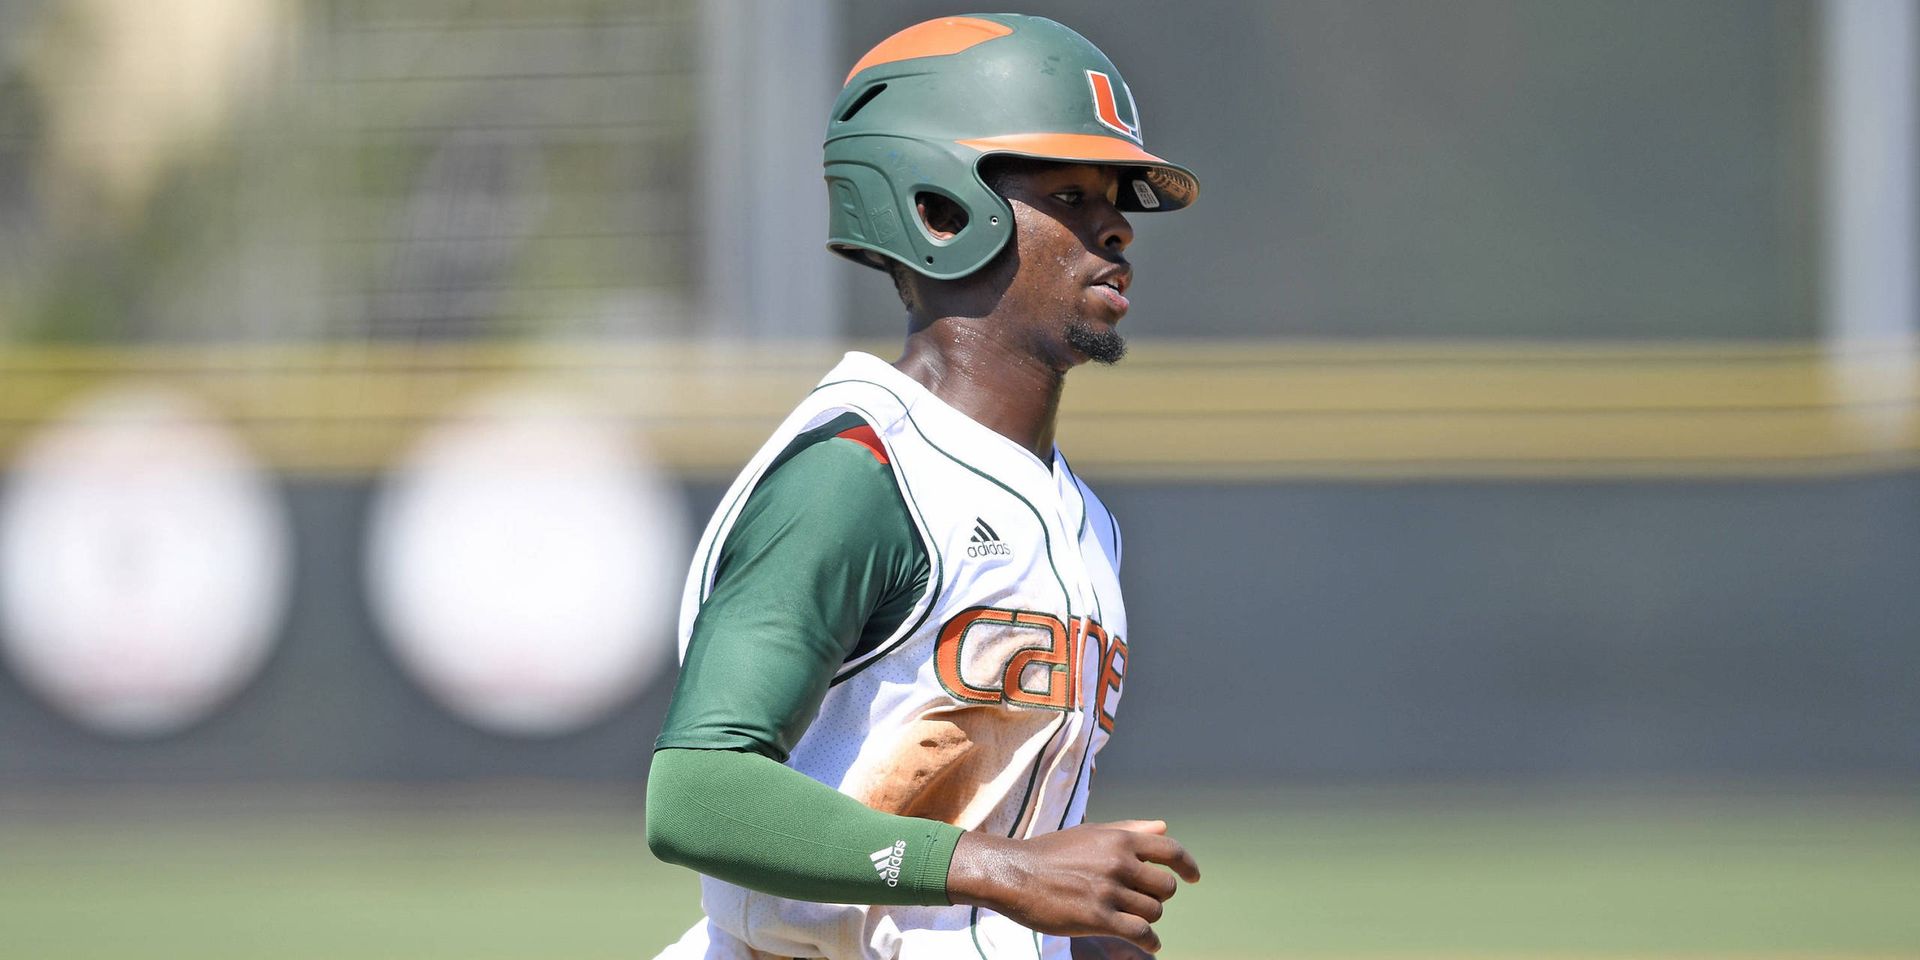 Hurricanes Come Up Short in 6-3 Loss to No. 8 UNC